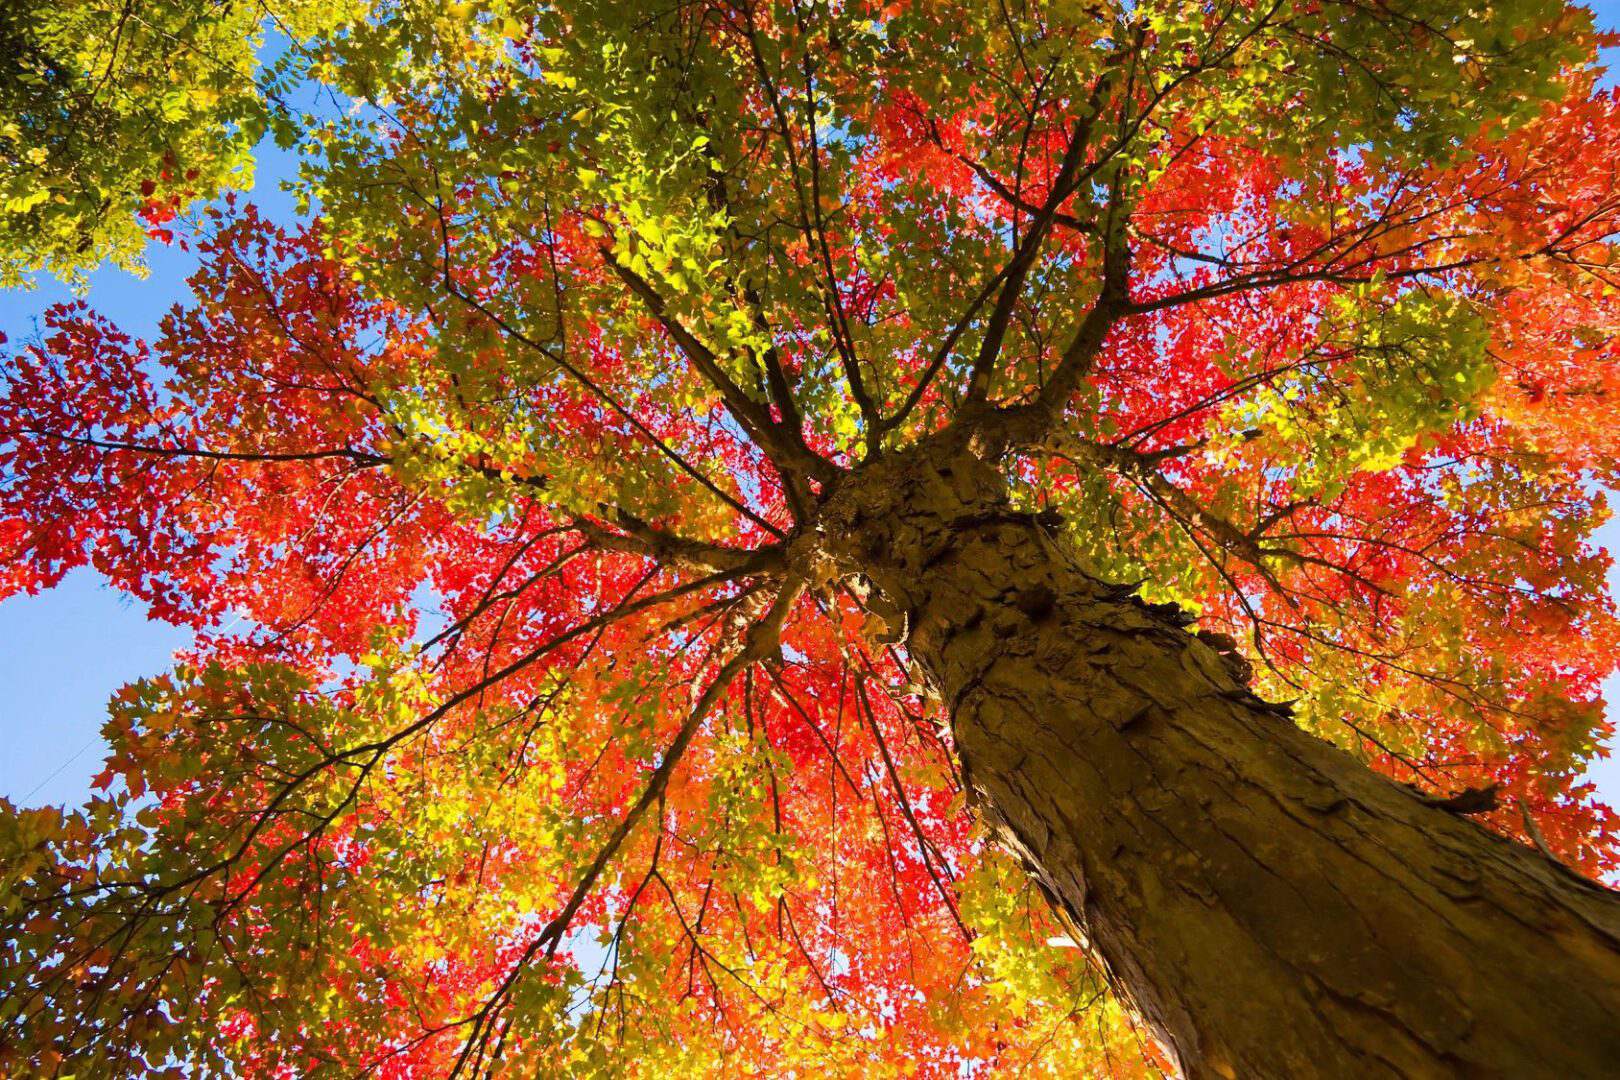 A tree with red and yellow leaves in the sky.